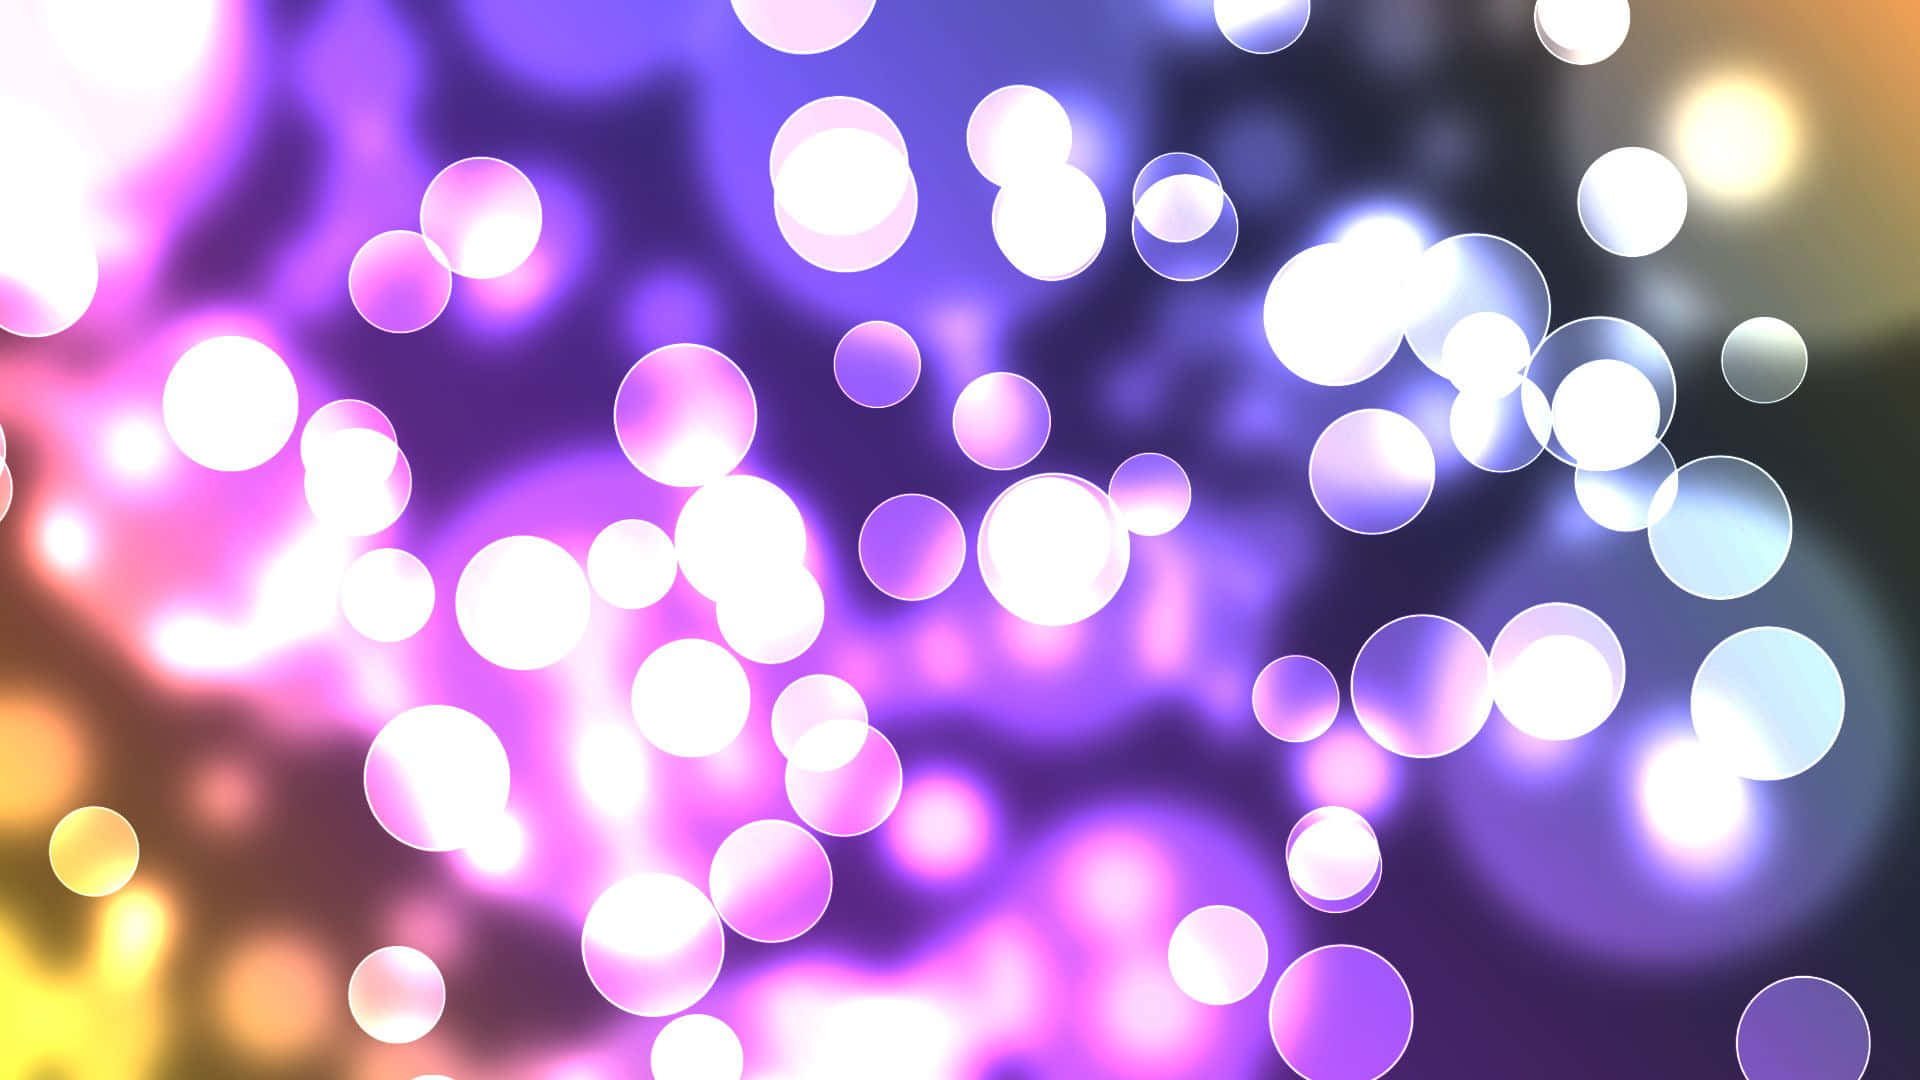 Reflective Bubbles With Gold And Violet Background